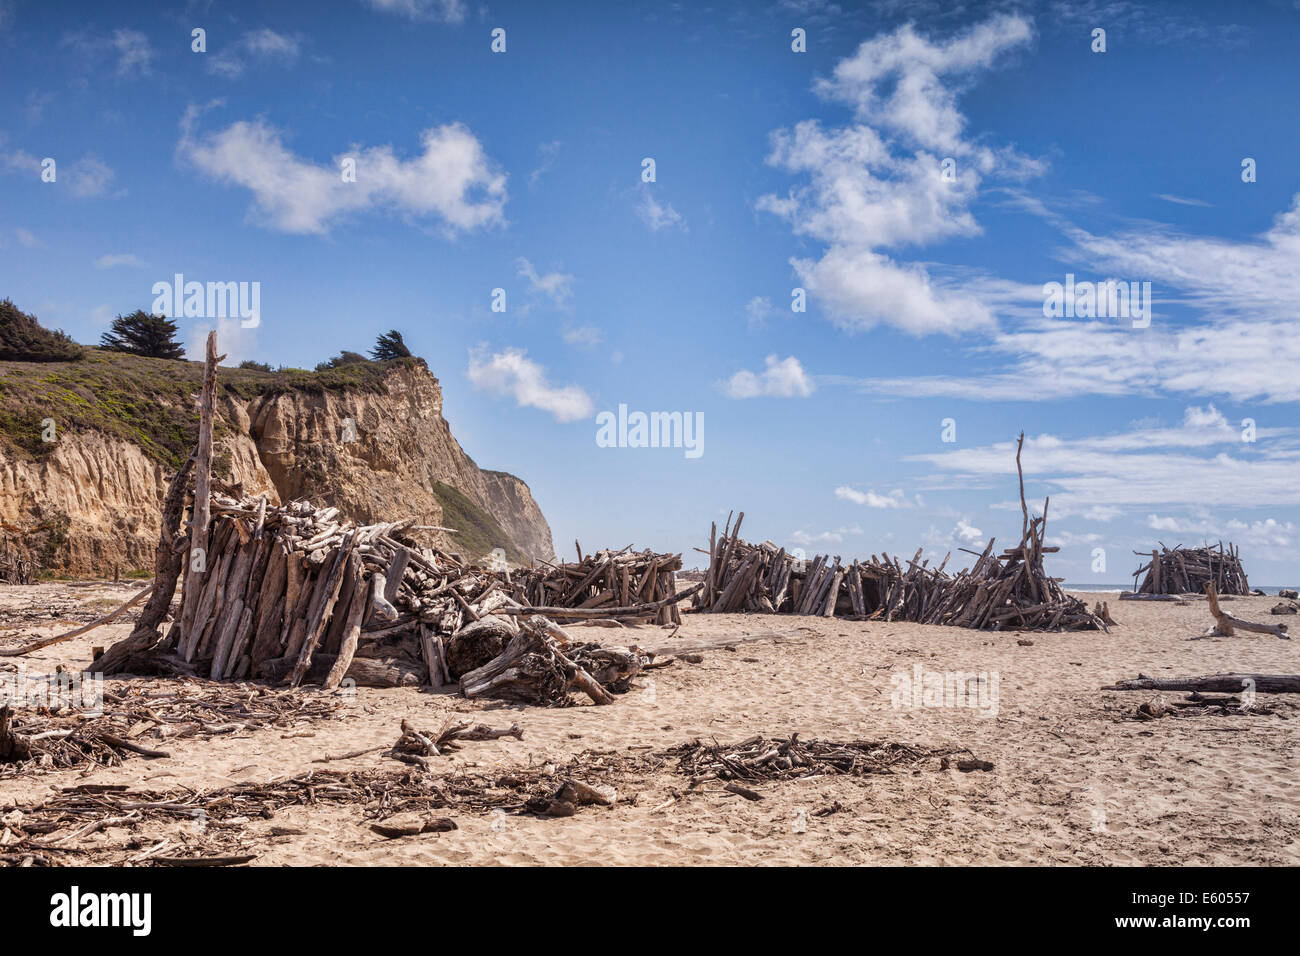 San Gregorio State Beach, San Mateo County, Calfornia, with driftwood structures. Stock Photo